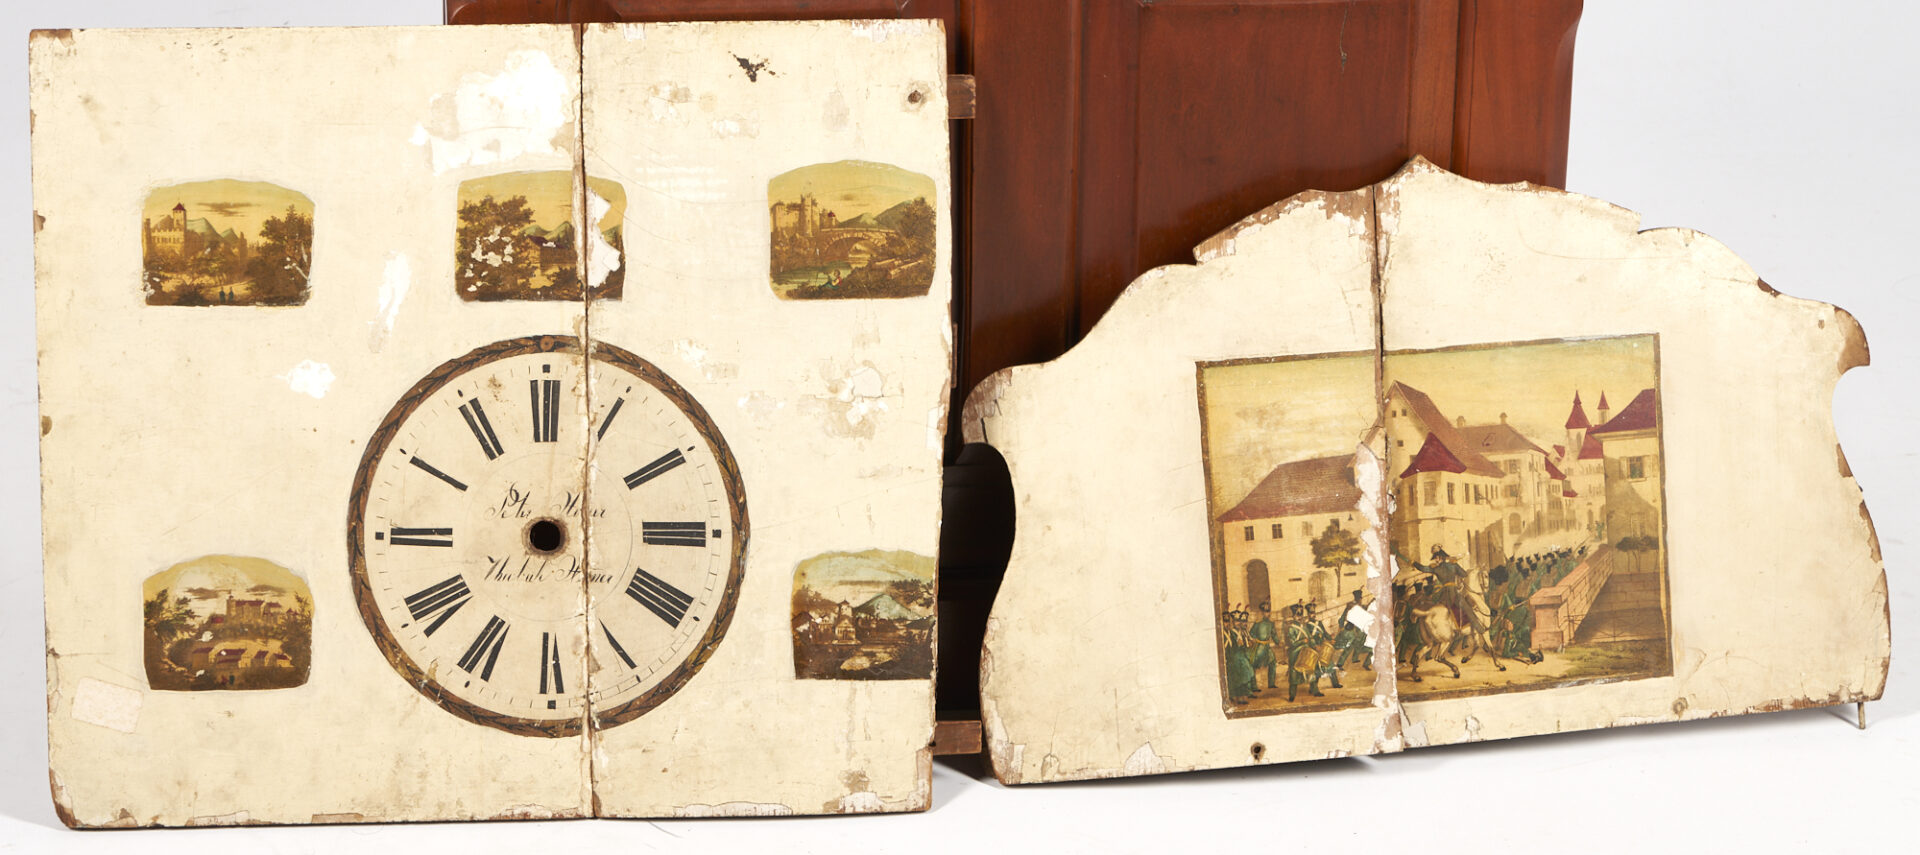 Lot 211: Automaton Musical Organ Clock by Peter Horner